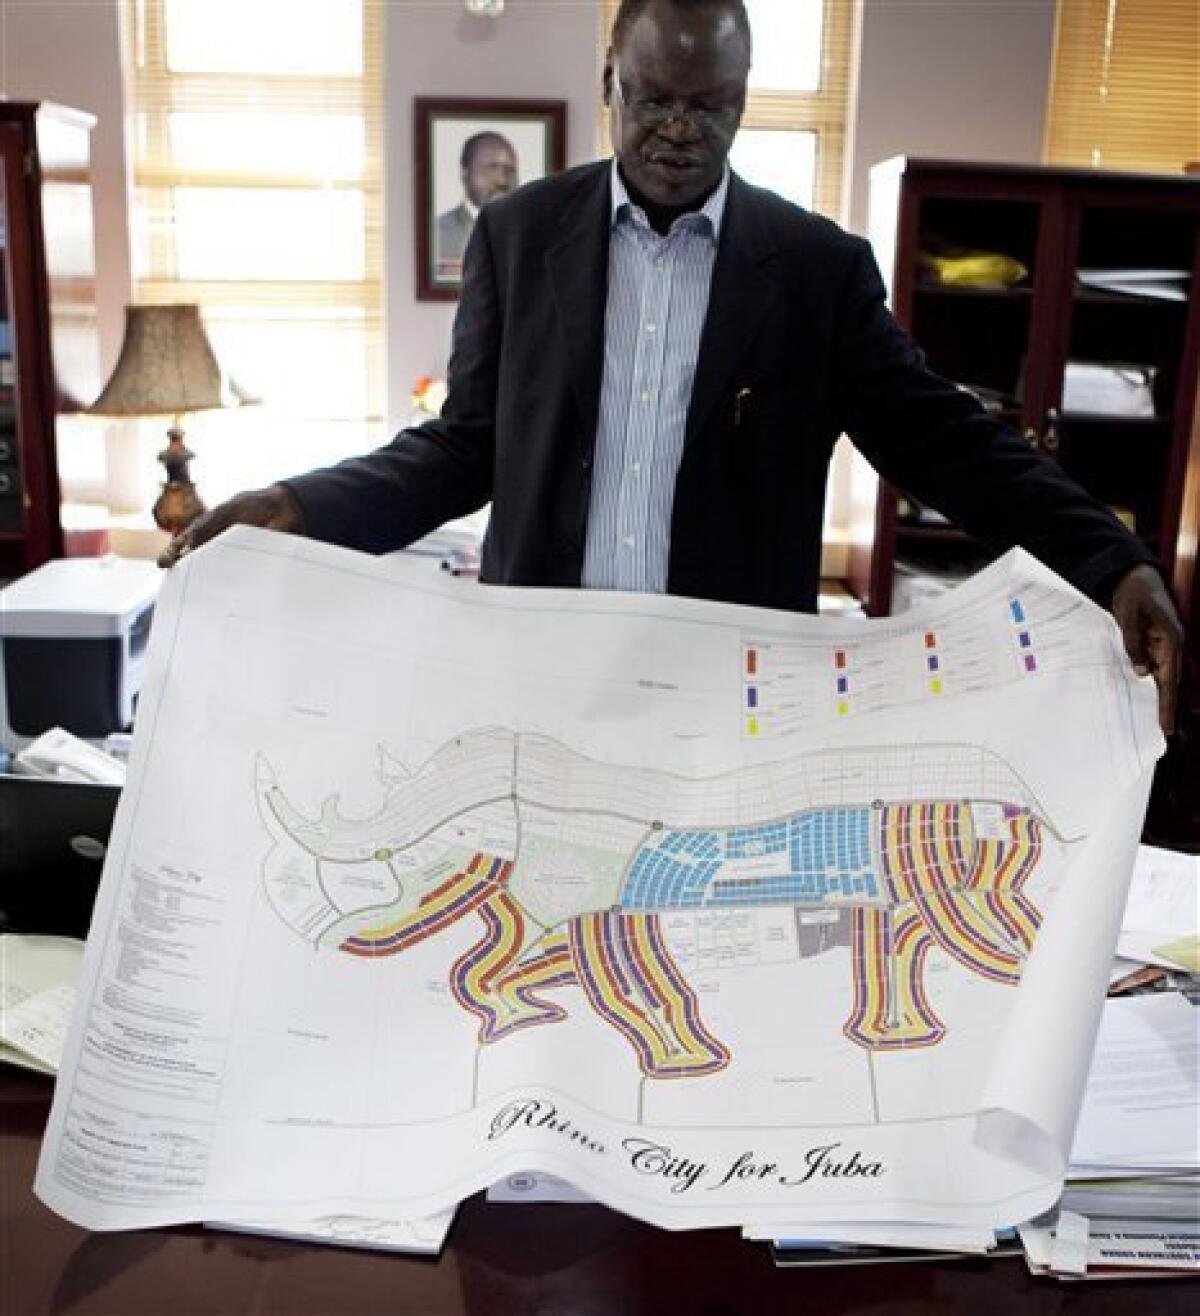 Dr. Daniel Wani, Undersecretary for the Ministry of Housing and Physical Planning in the Government of South Sudan, explains a map of Juba in the shape of an rhino, Wednesday, Aug 18, 2010, in Juba, Southern Sudan. A city shaped like a giraffe? A rhino-shaped town? Even one like a pineapple?Southern Sudan has unveiled ambitious plans to remake its capital cities in the shapes found on their state flags, and an official says the government is talking with investors to raise the $10 billion the fanciful communities would cost.(AP Photo/Pete Muller)